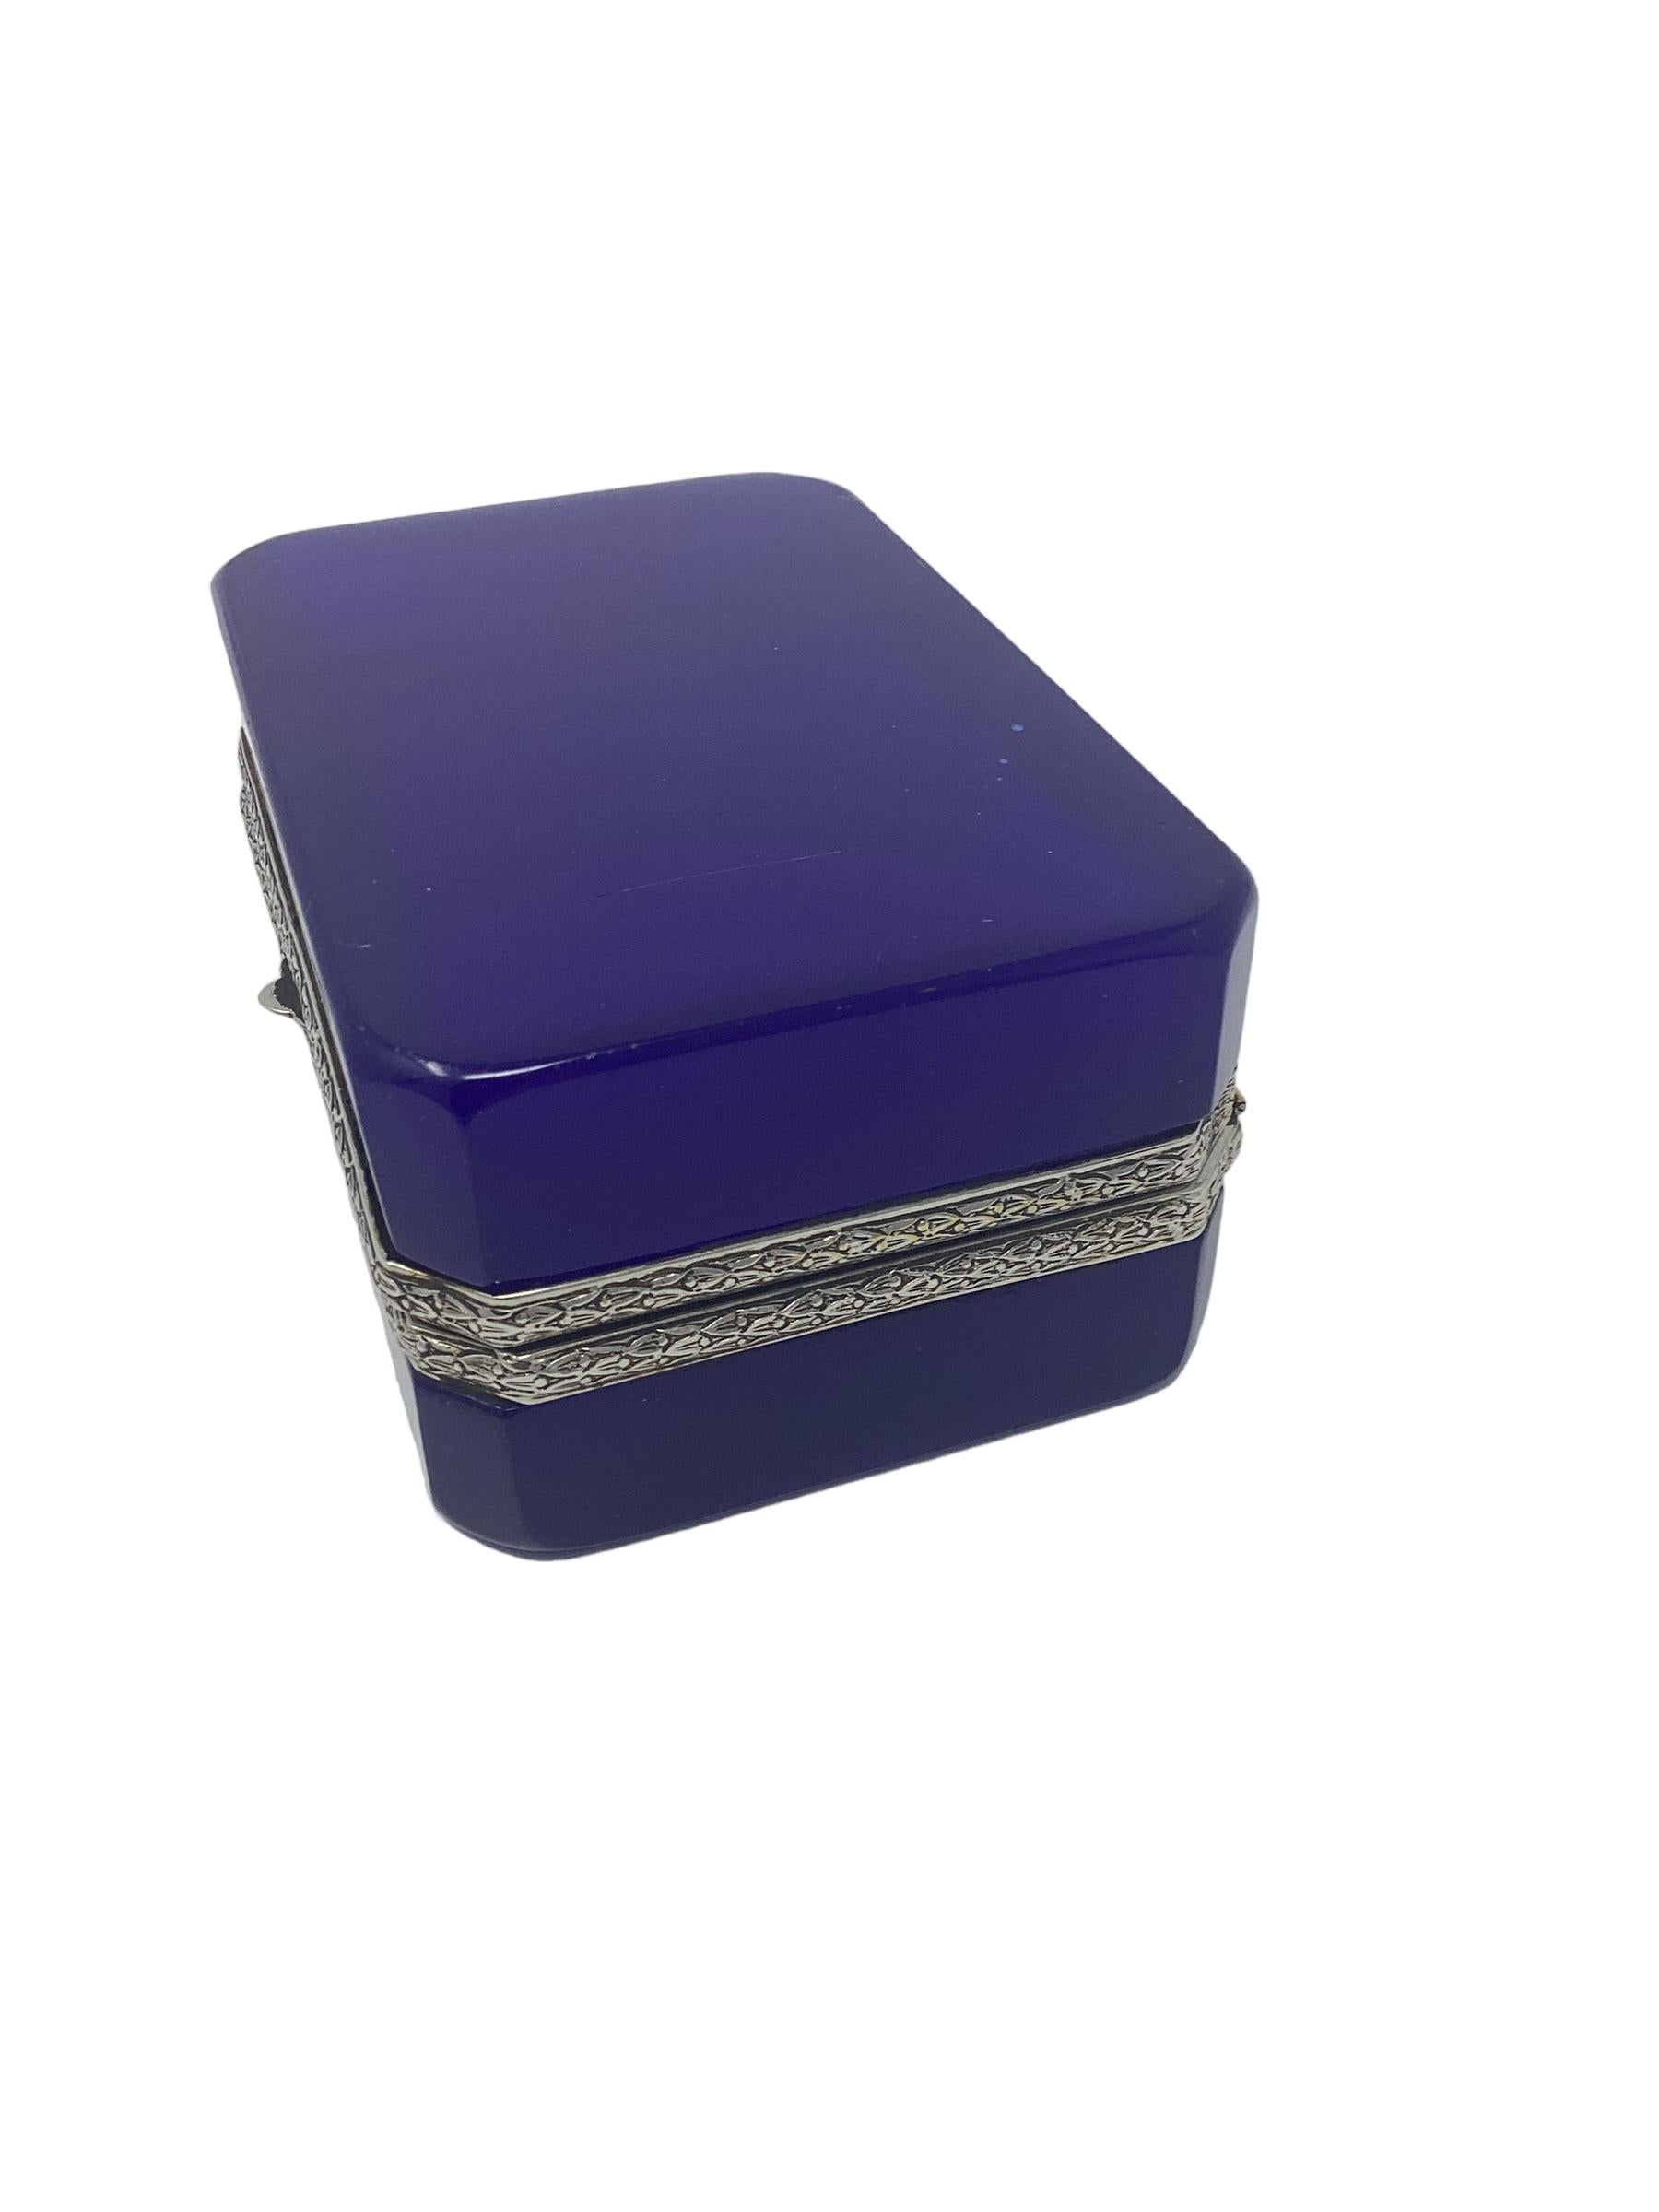 French Blue Opaline Box with Silver Plated Mounts  In Good Condition For Sale In Chapel Hill, NC